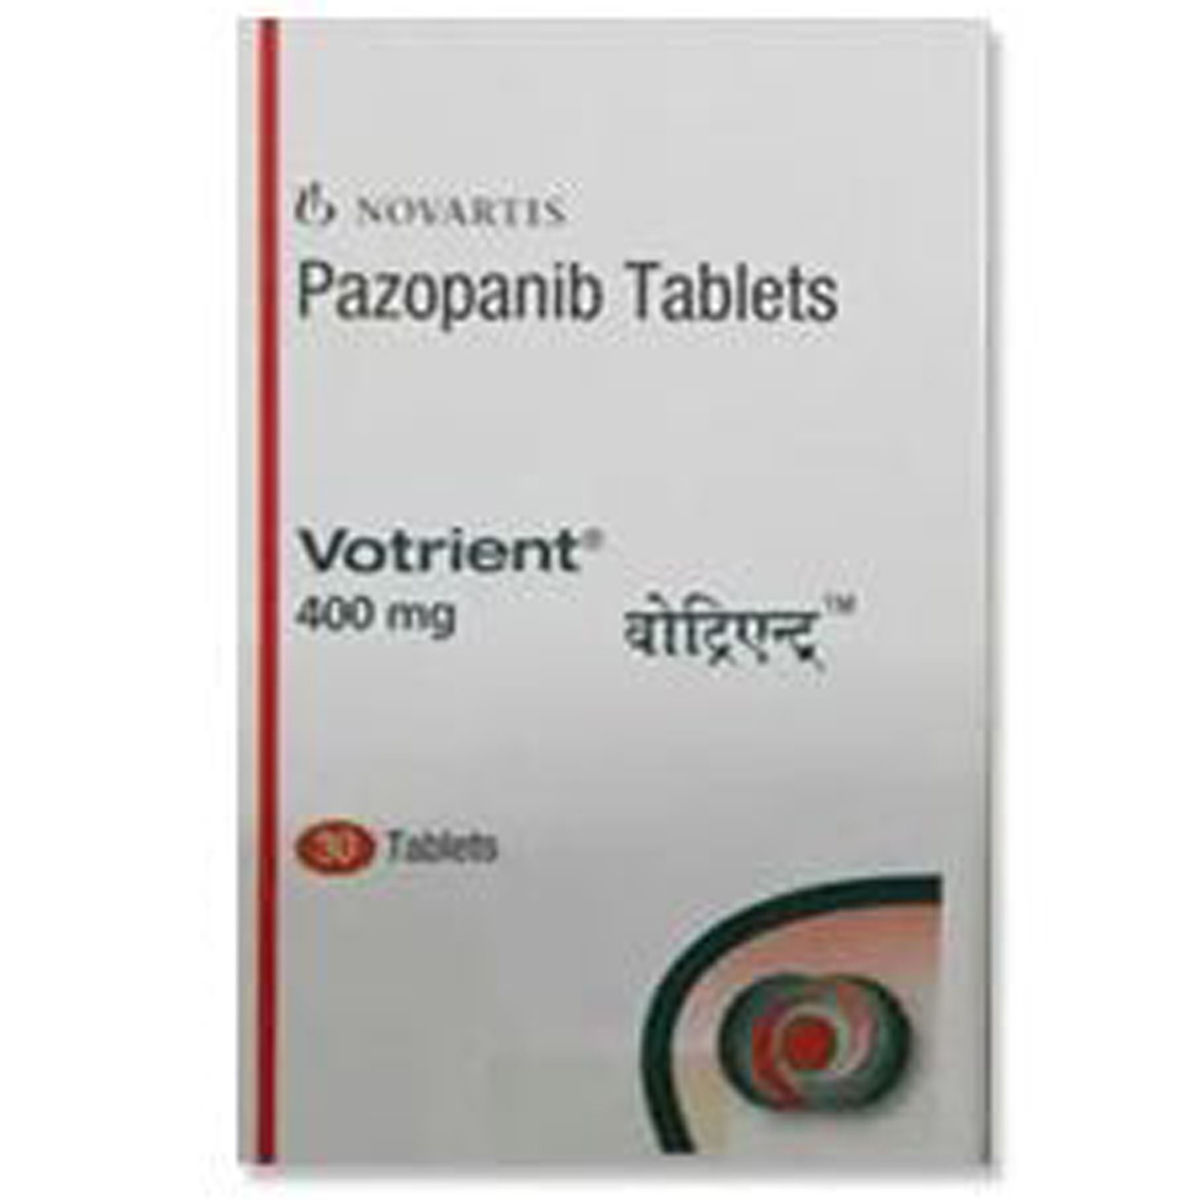 Votrient 400 mg Tablet 30's, Pack of 1 Tablet